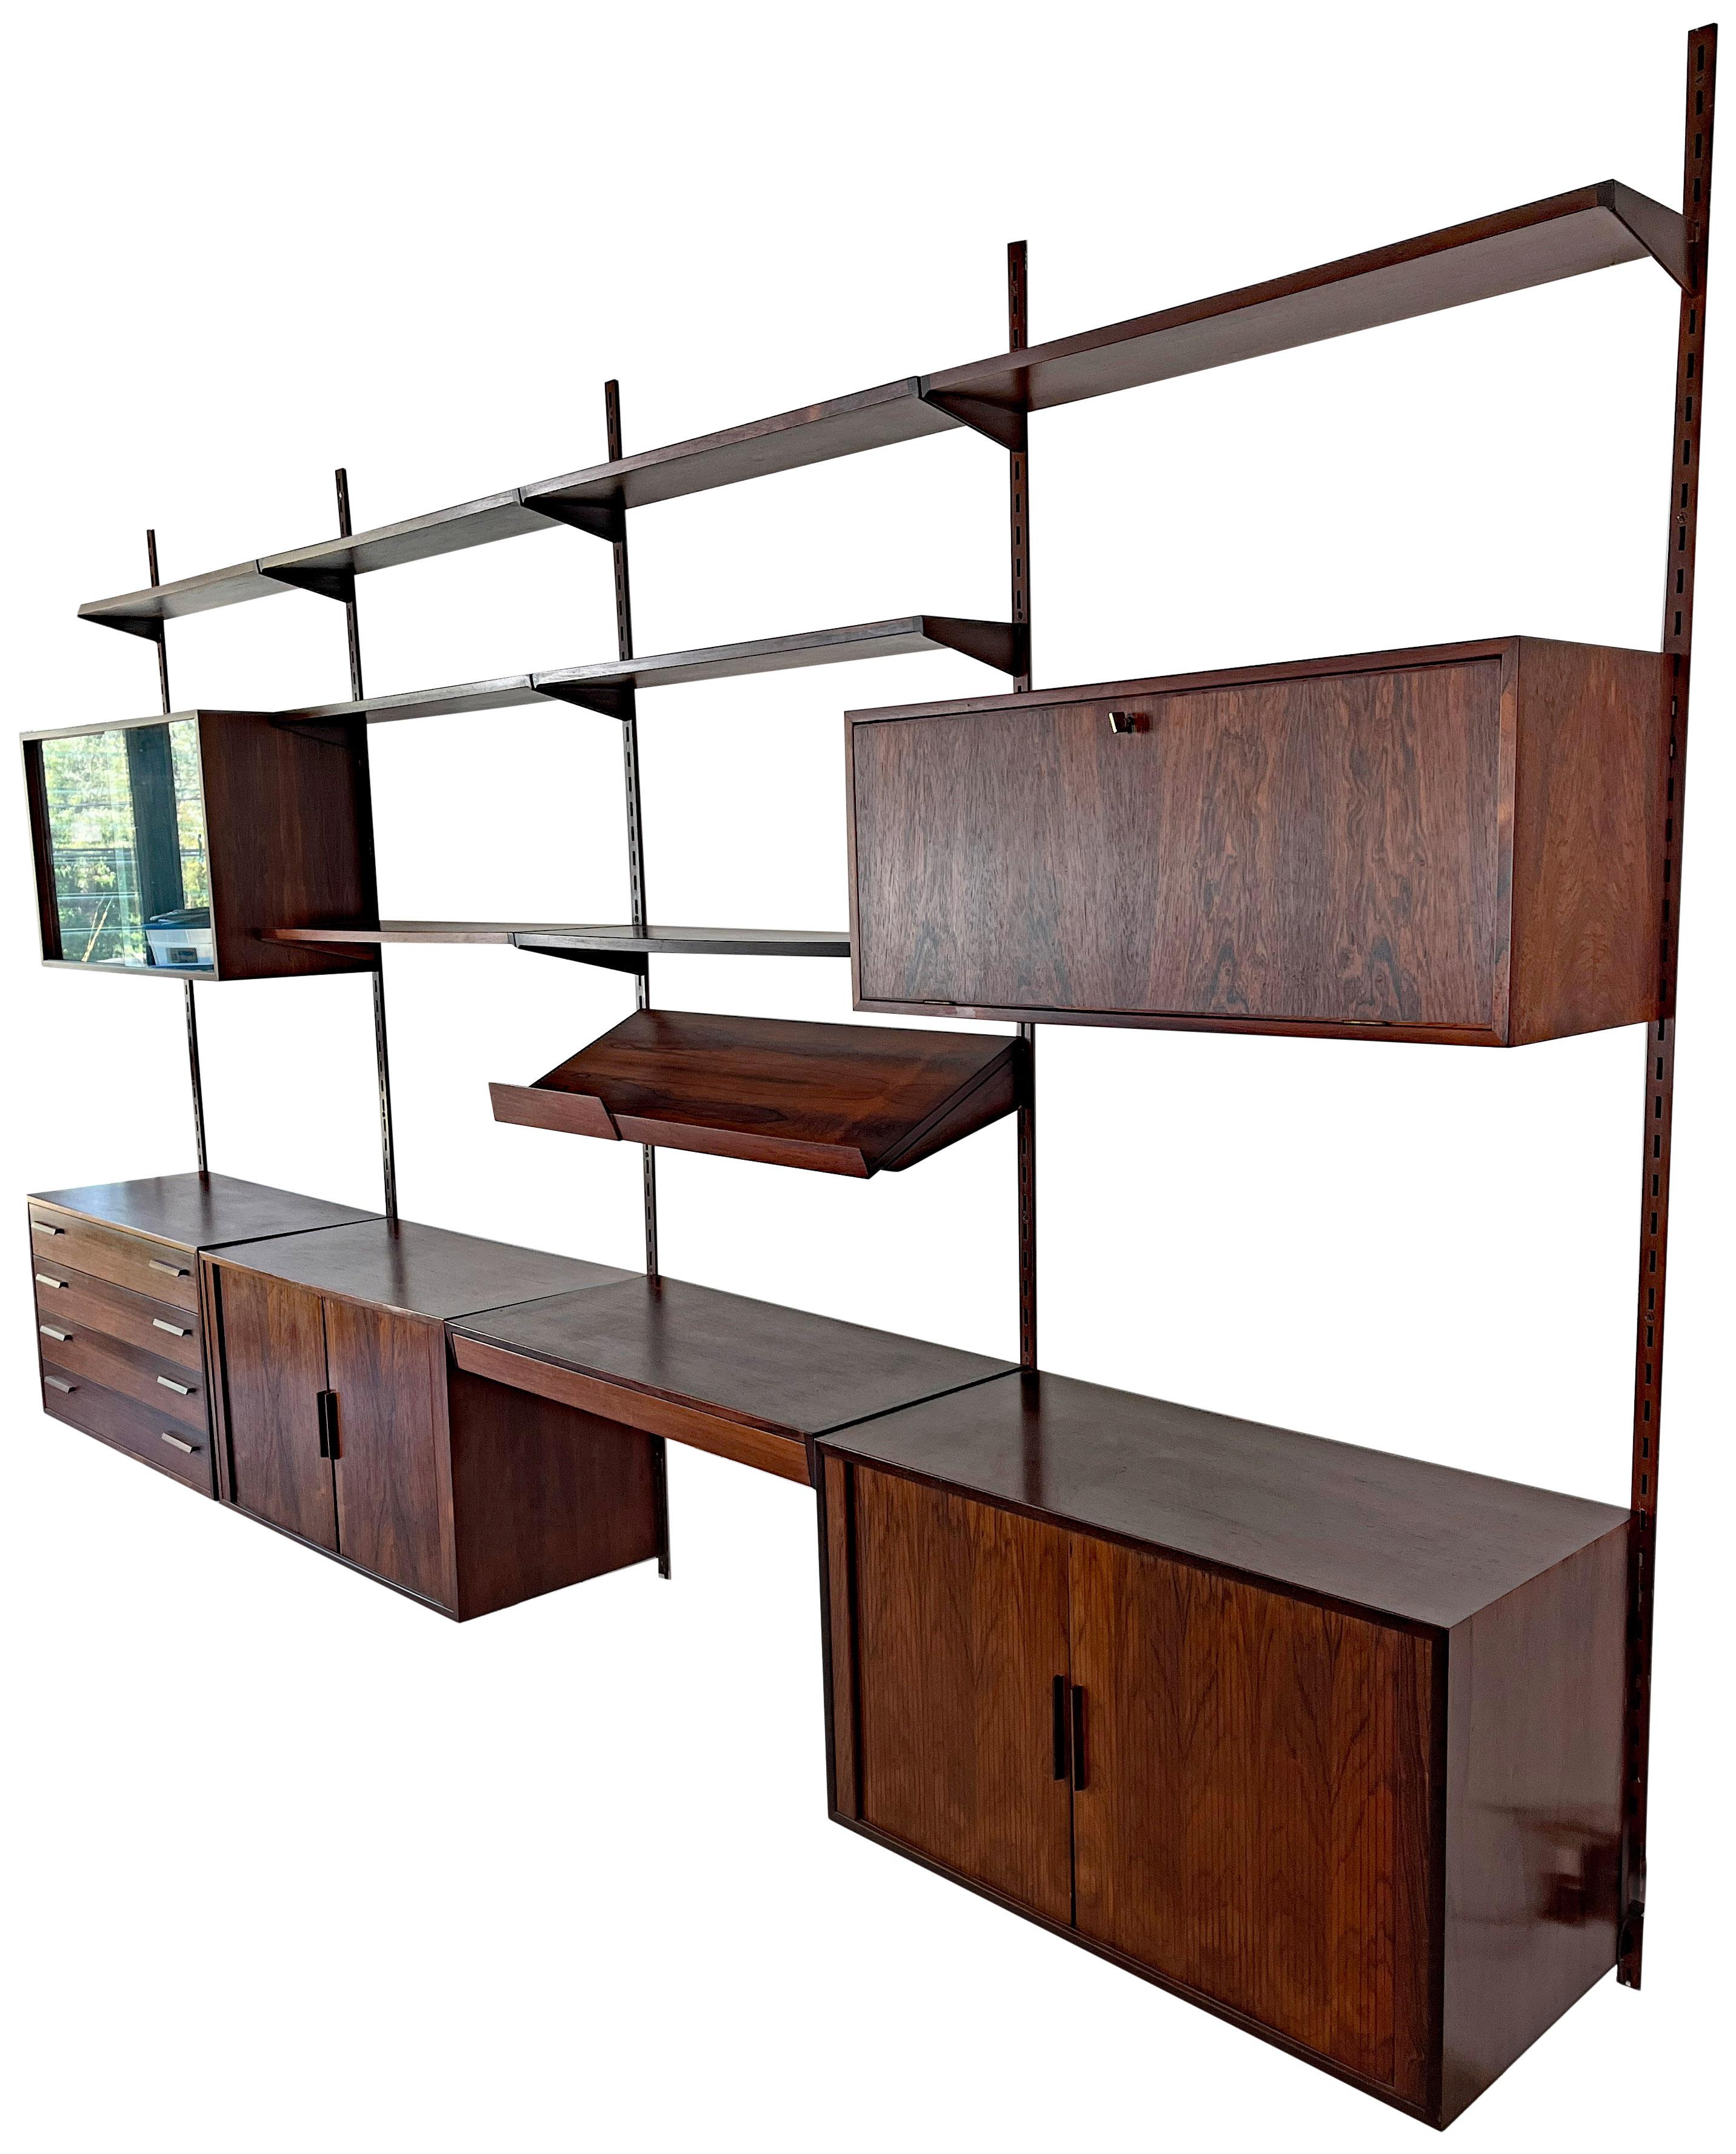 Very elegant 1960s rosewood 4 bay wall unit by Kai Kristiansen for FM Møbler, Denmark. This Scandinavian modern design allows one to arrange the cabinets, shelves, and workspace to fit your home or business storage and display needs. 



1 x display